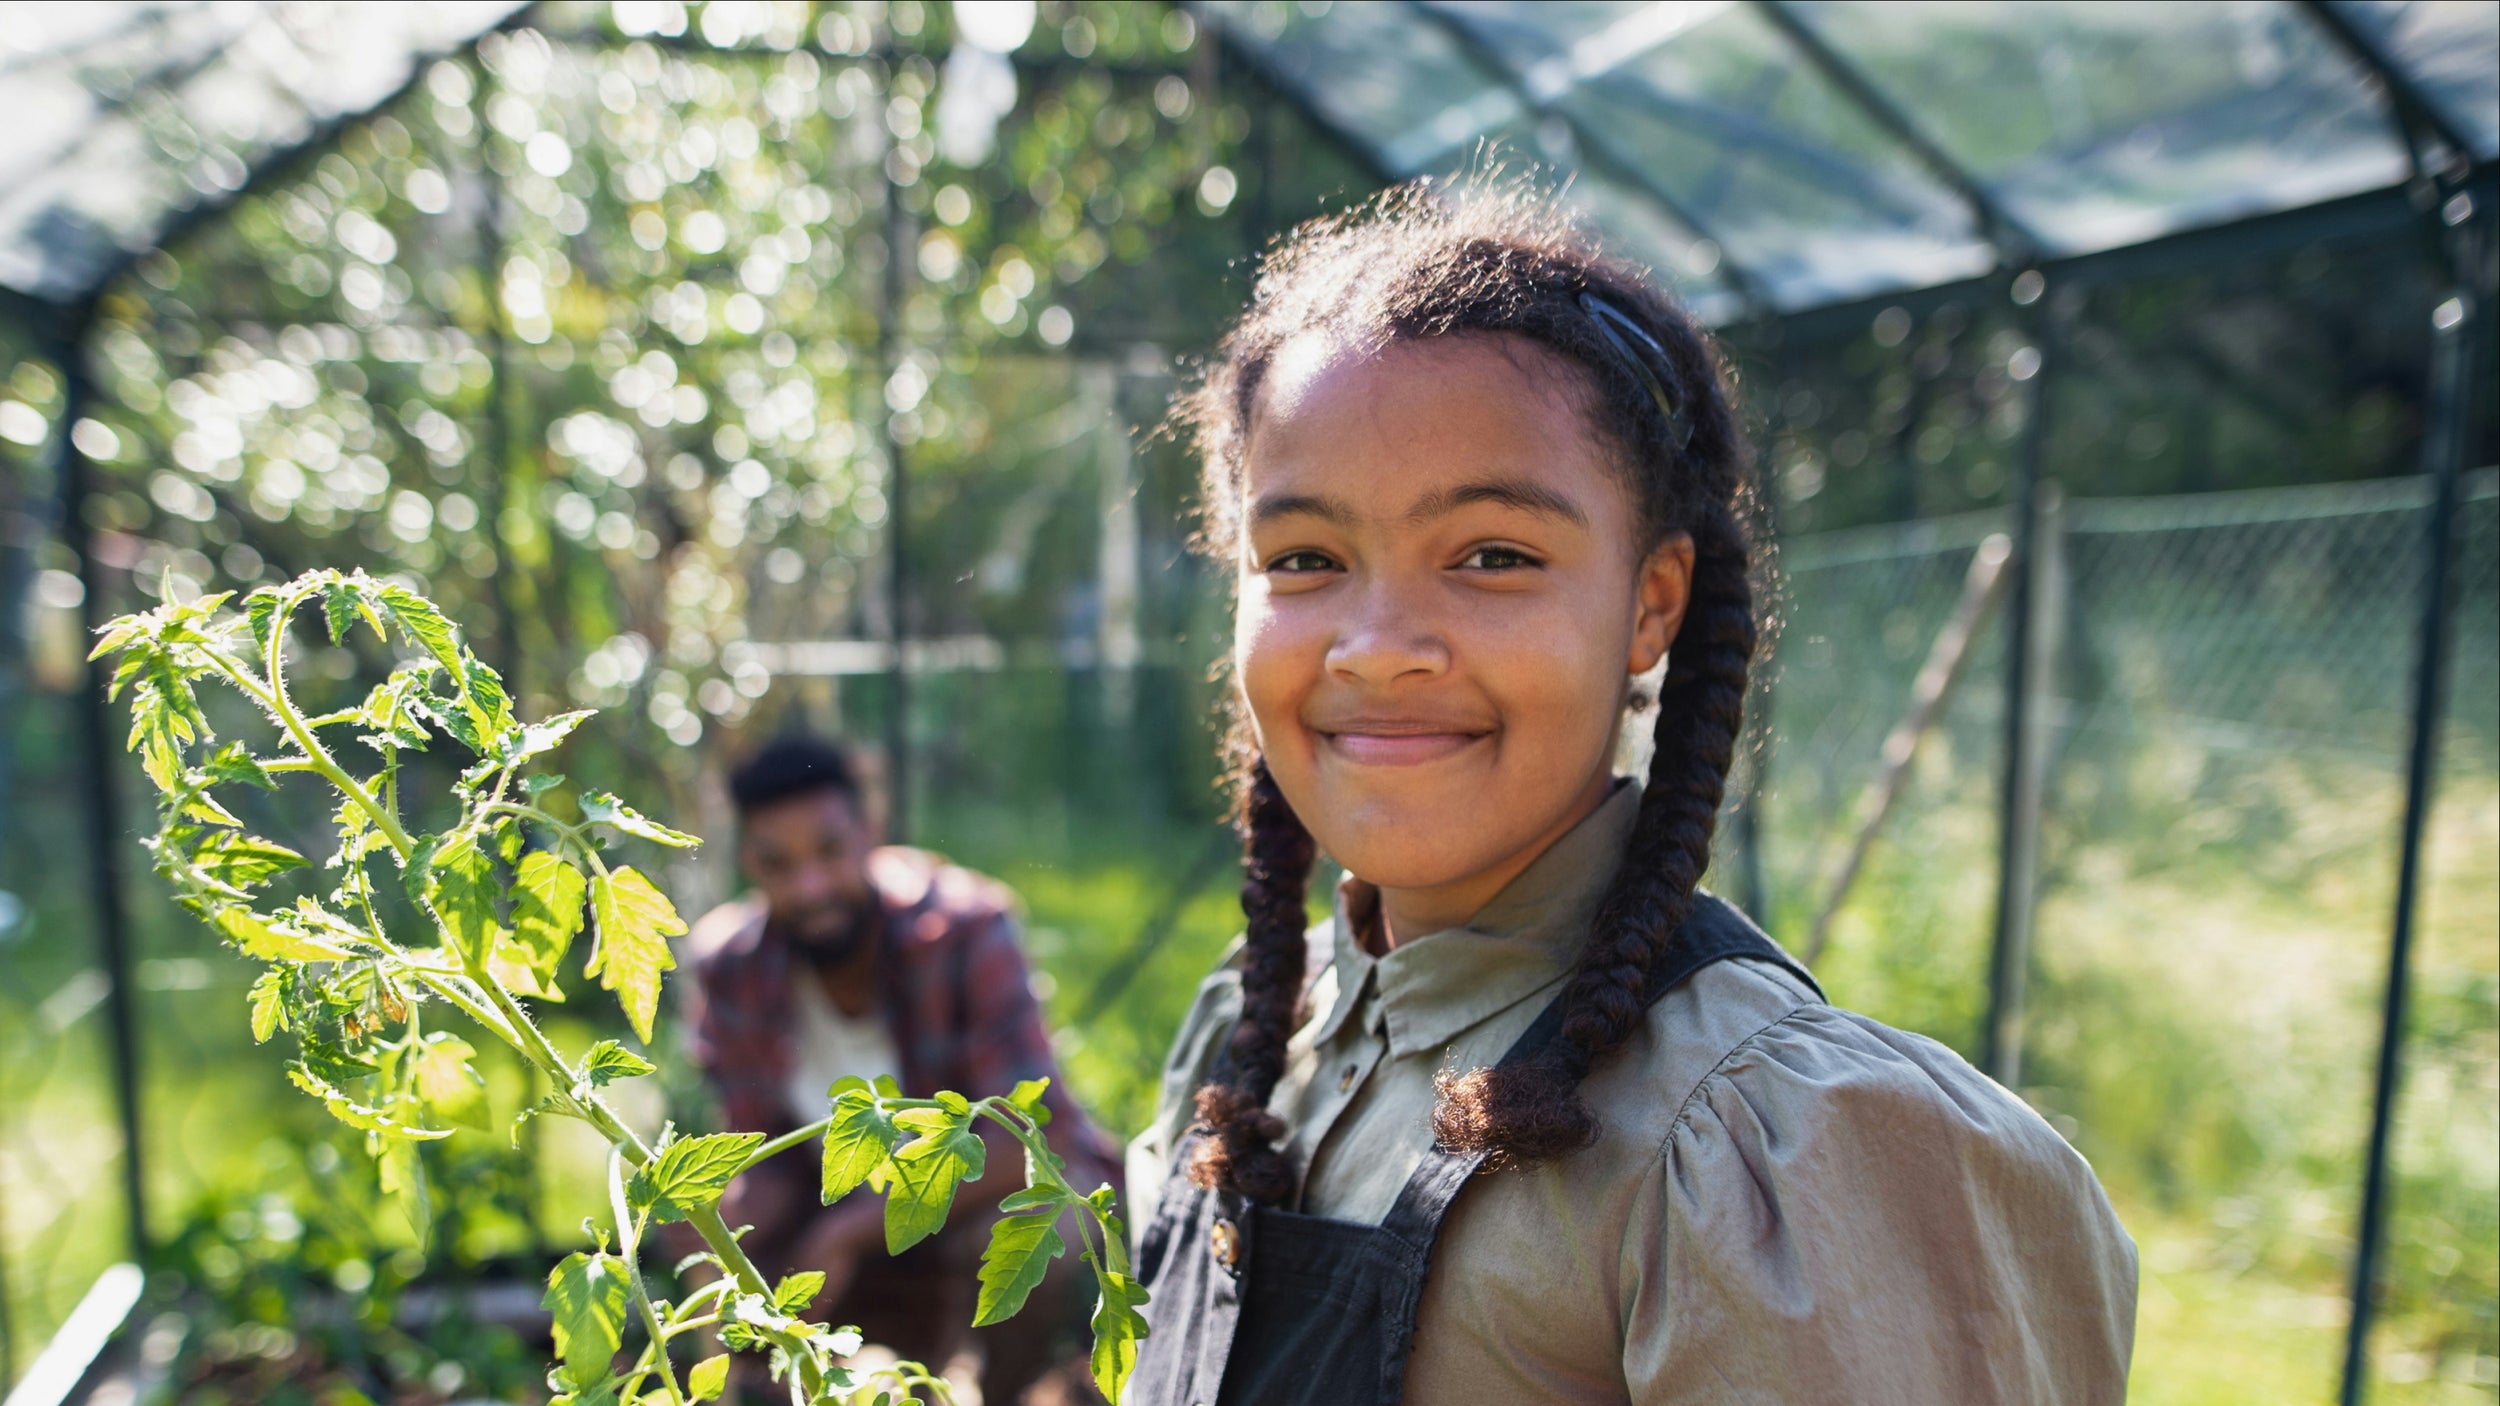 A young girl smiling iwth and pig tails in a greenhouse with a person in the background